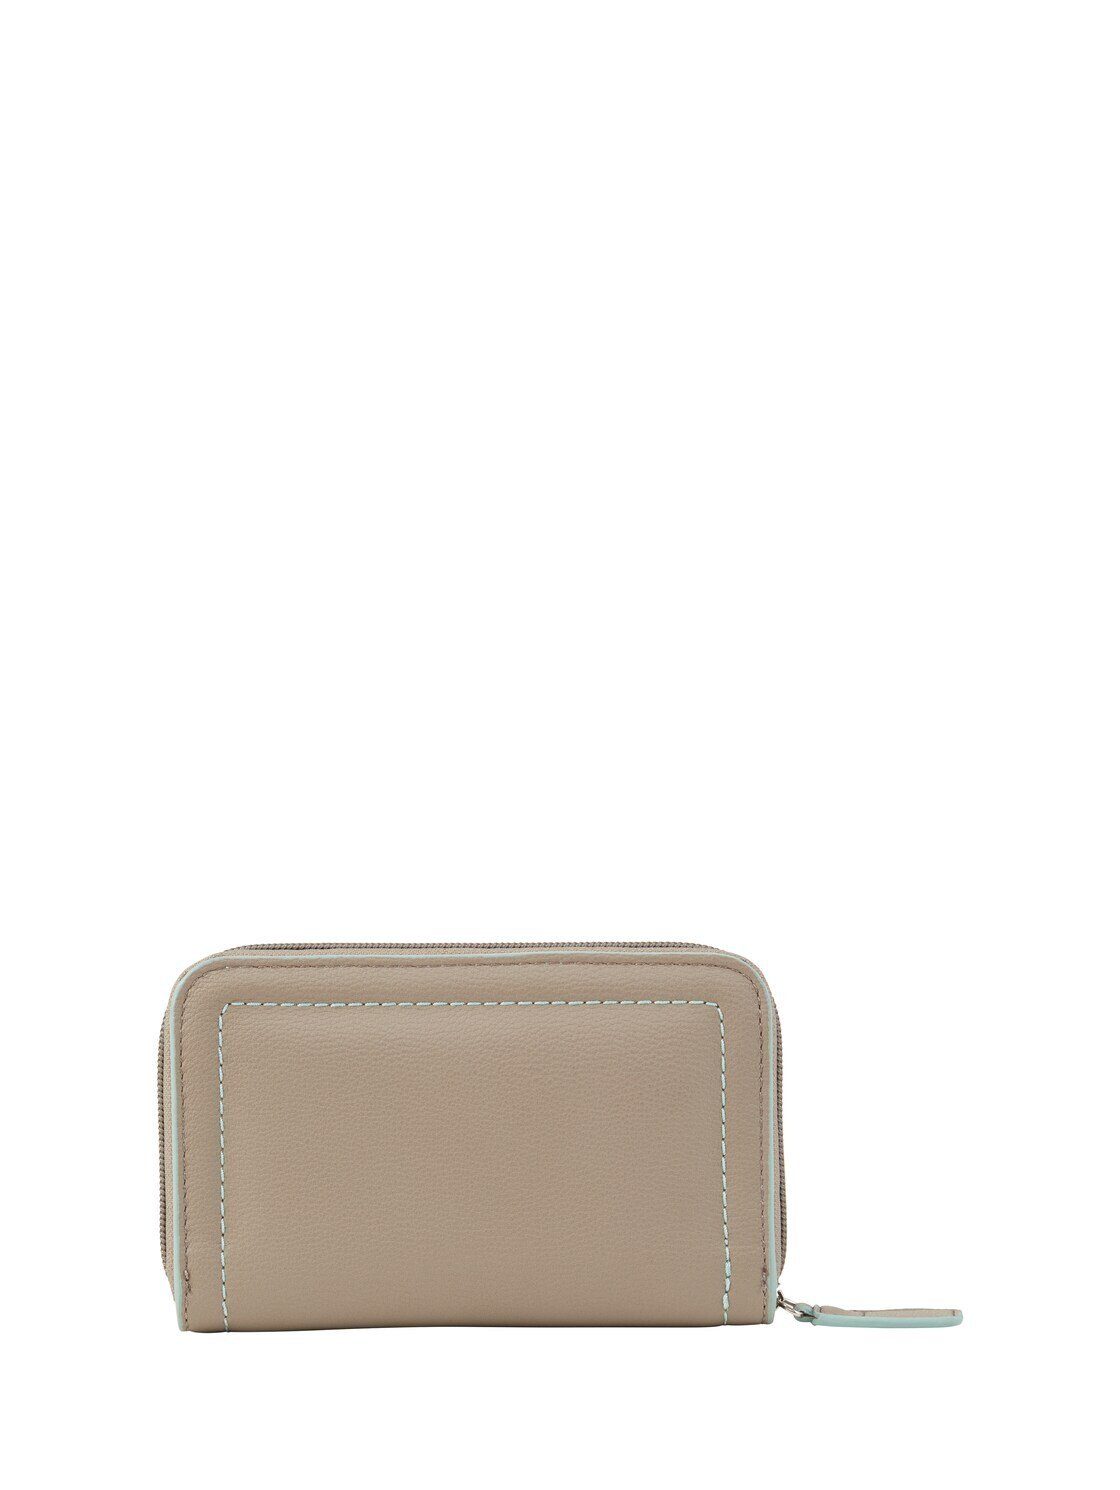 Miri Mare taupe TOM Portemonnaie Clutch TAILOR mixed